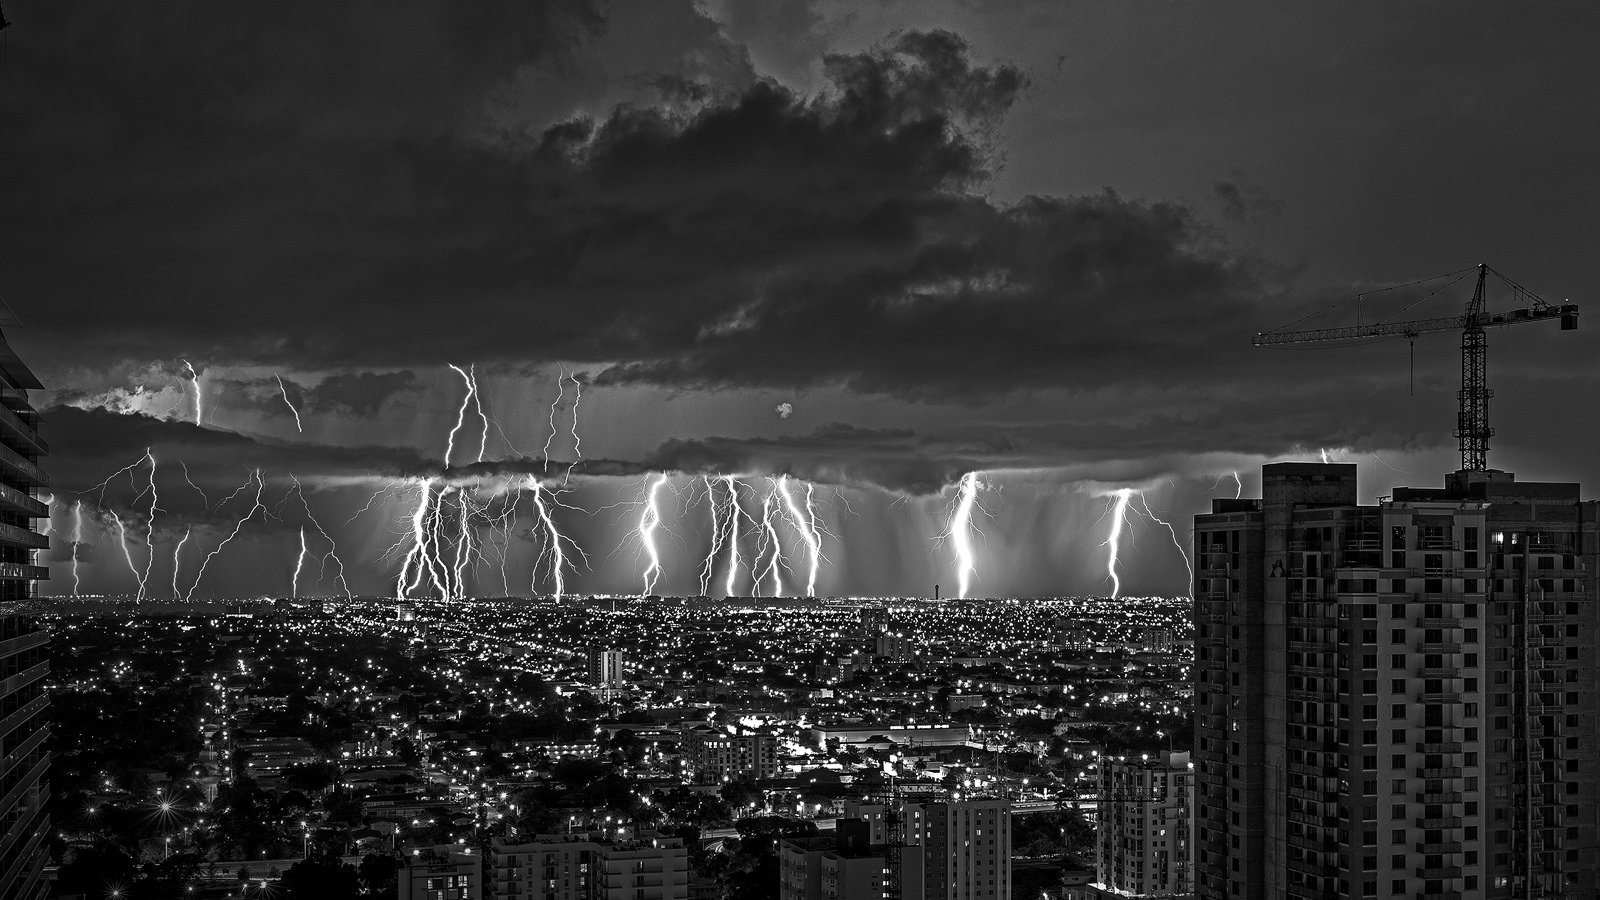 Lightning night light nature storm cities sky landscapes electricity Skyscapes wallpaperx900